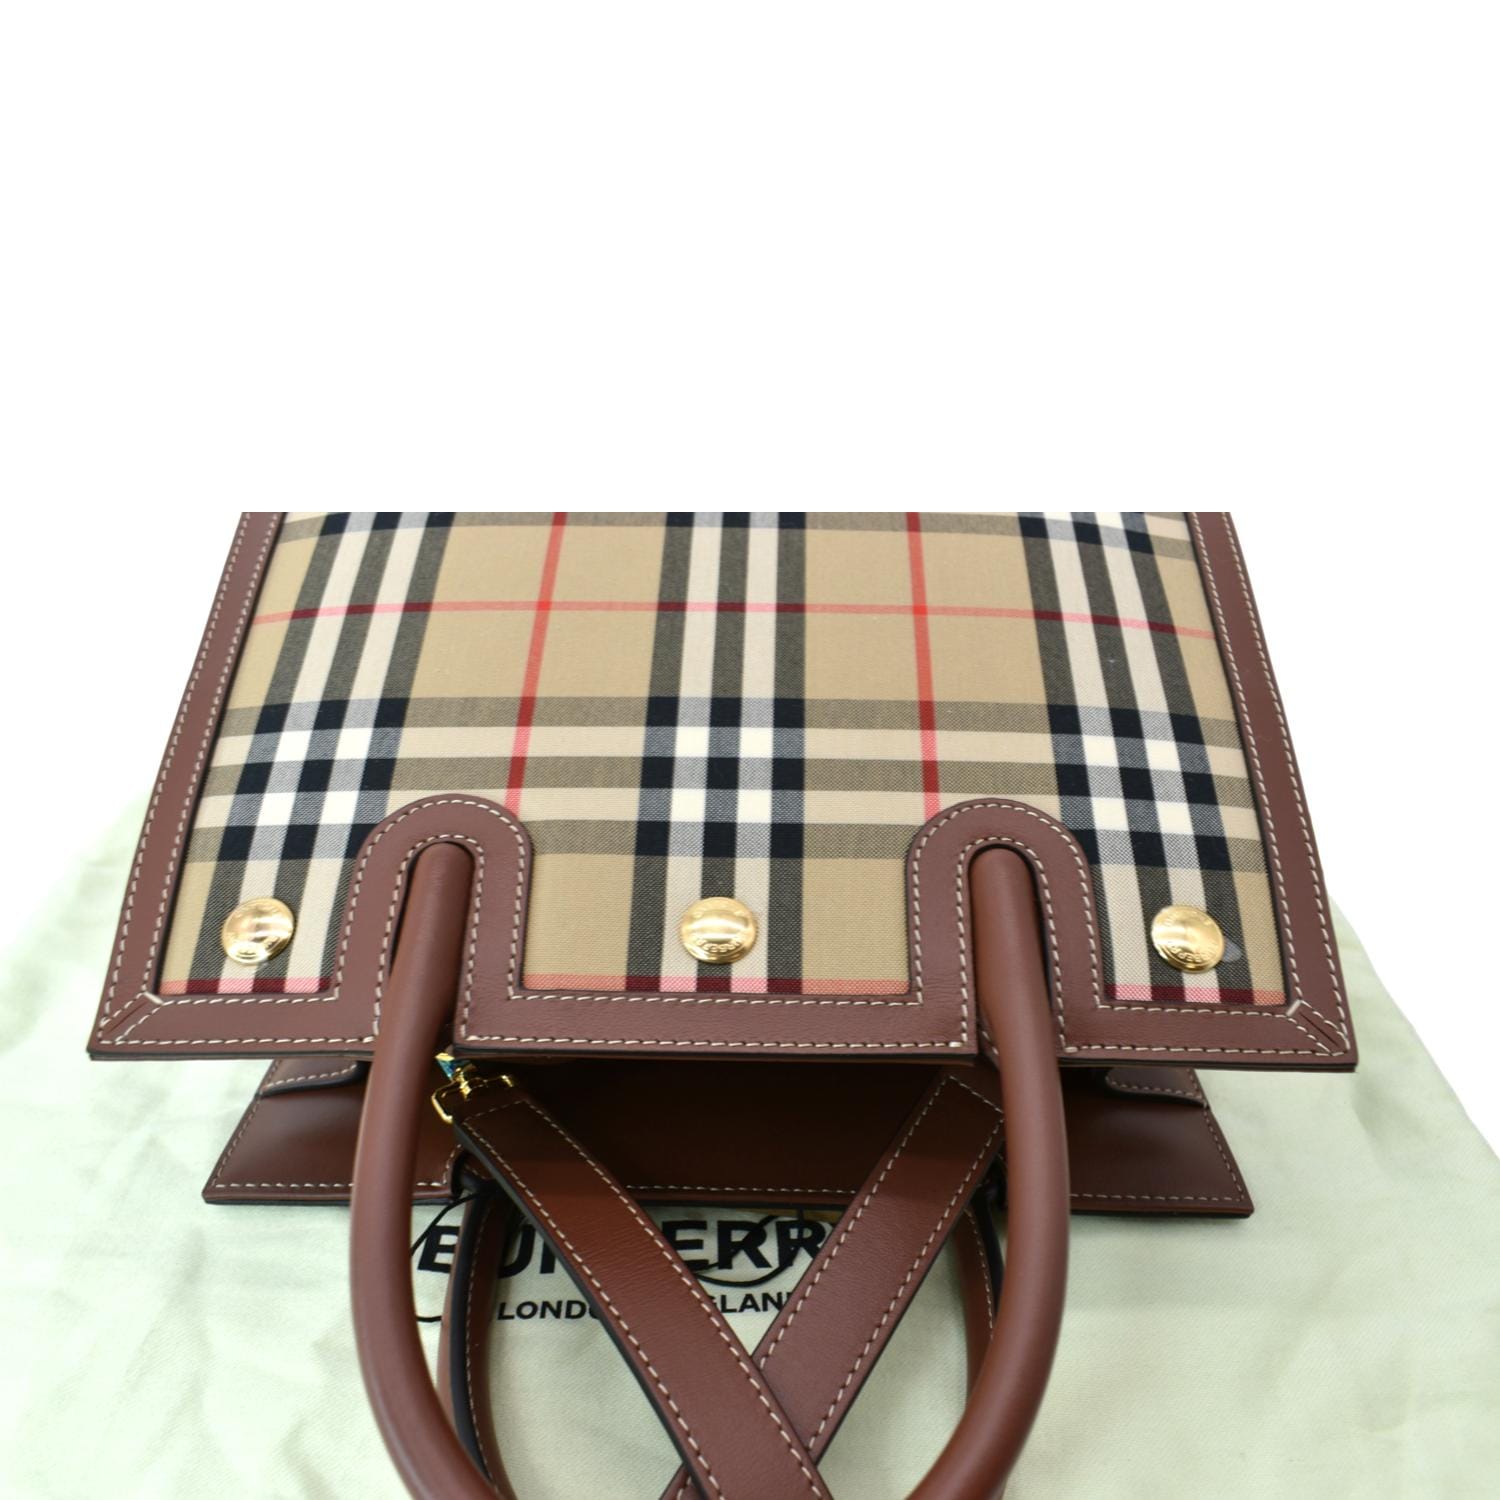 Authentic vintage Burberry bag. Had for a while love